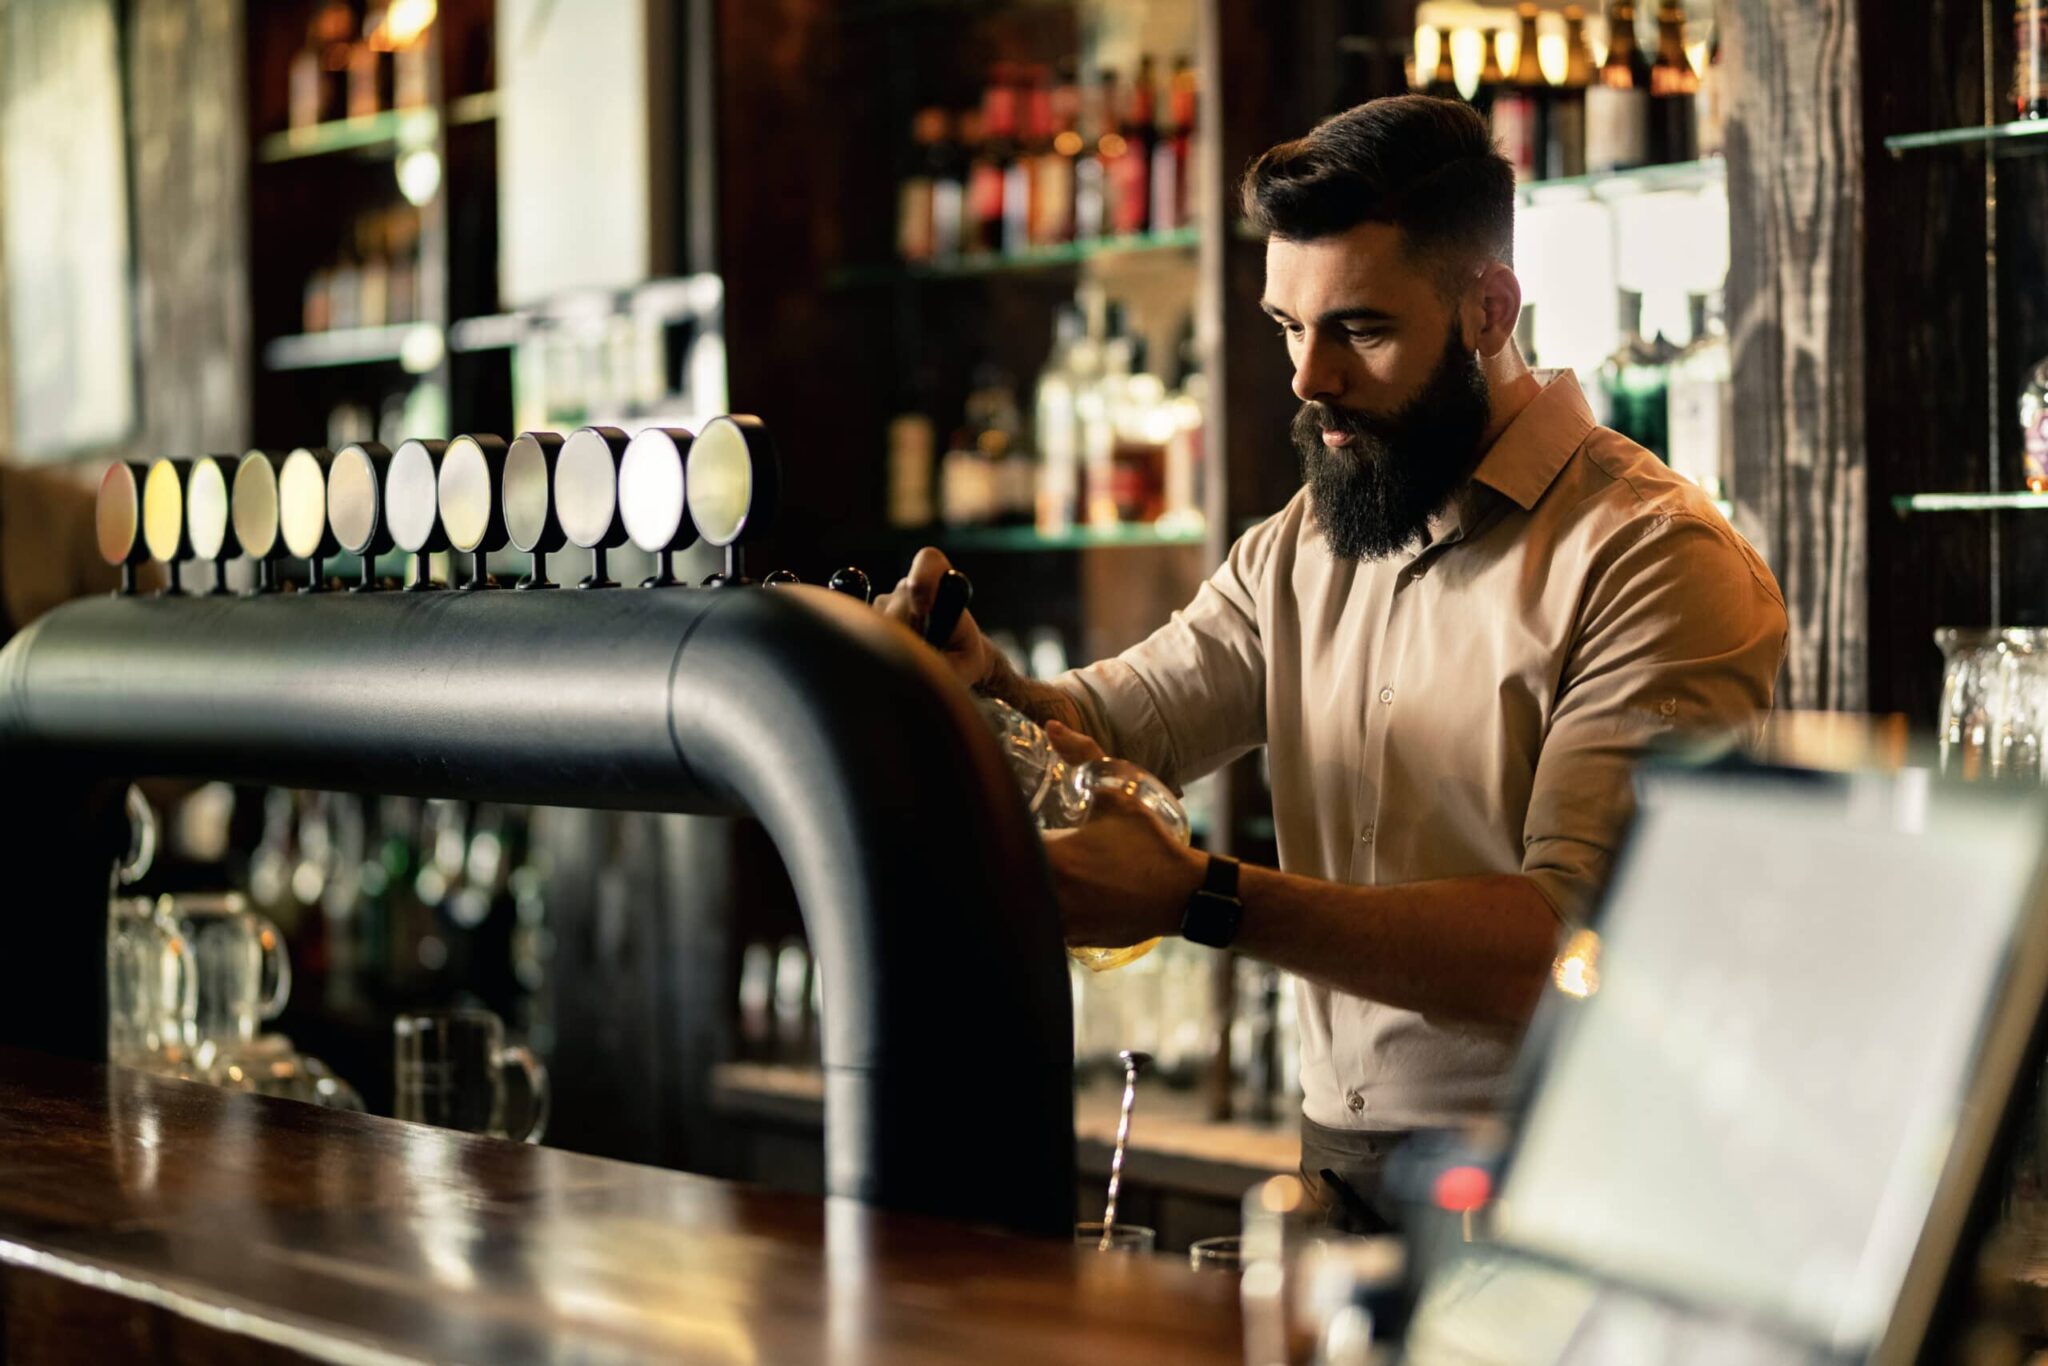 Bartender Liability Laws: Are Bars and Restaurants Responsible for Overserving Drunk Drivers?